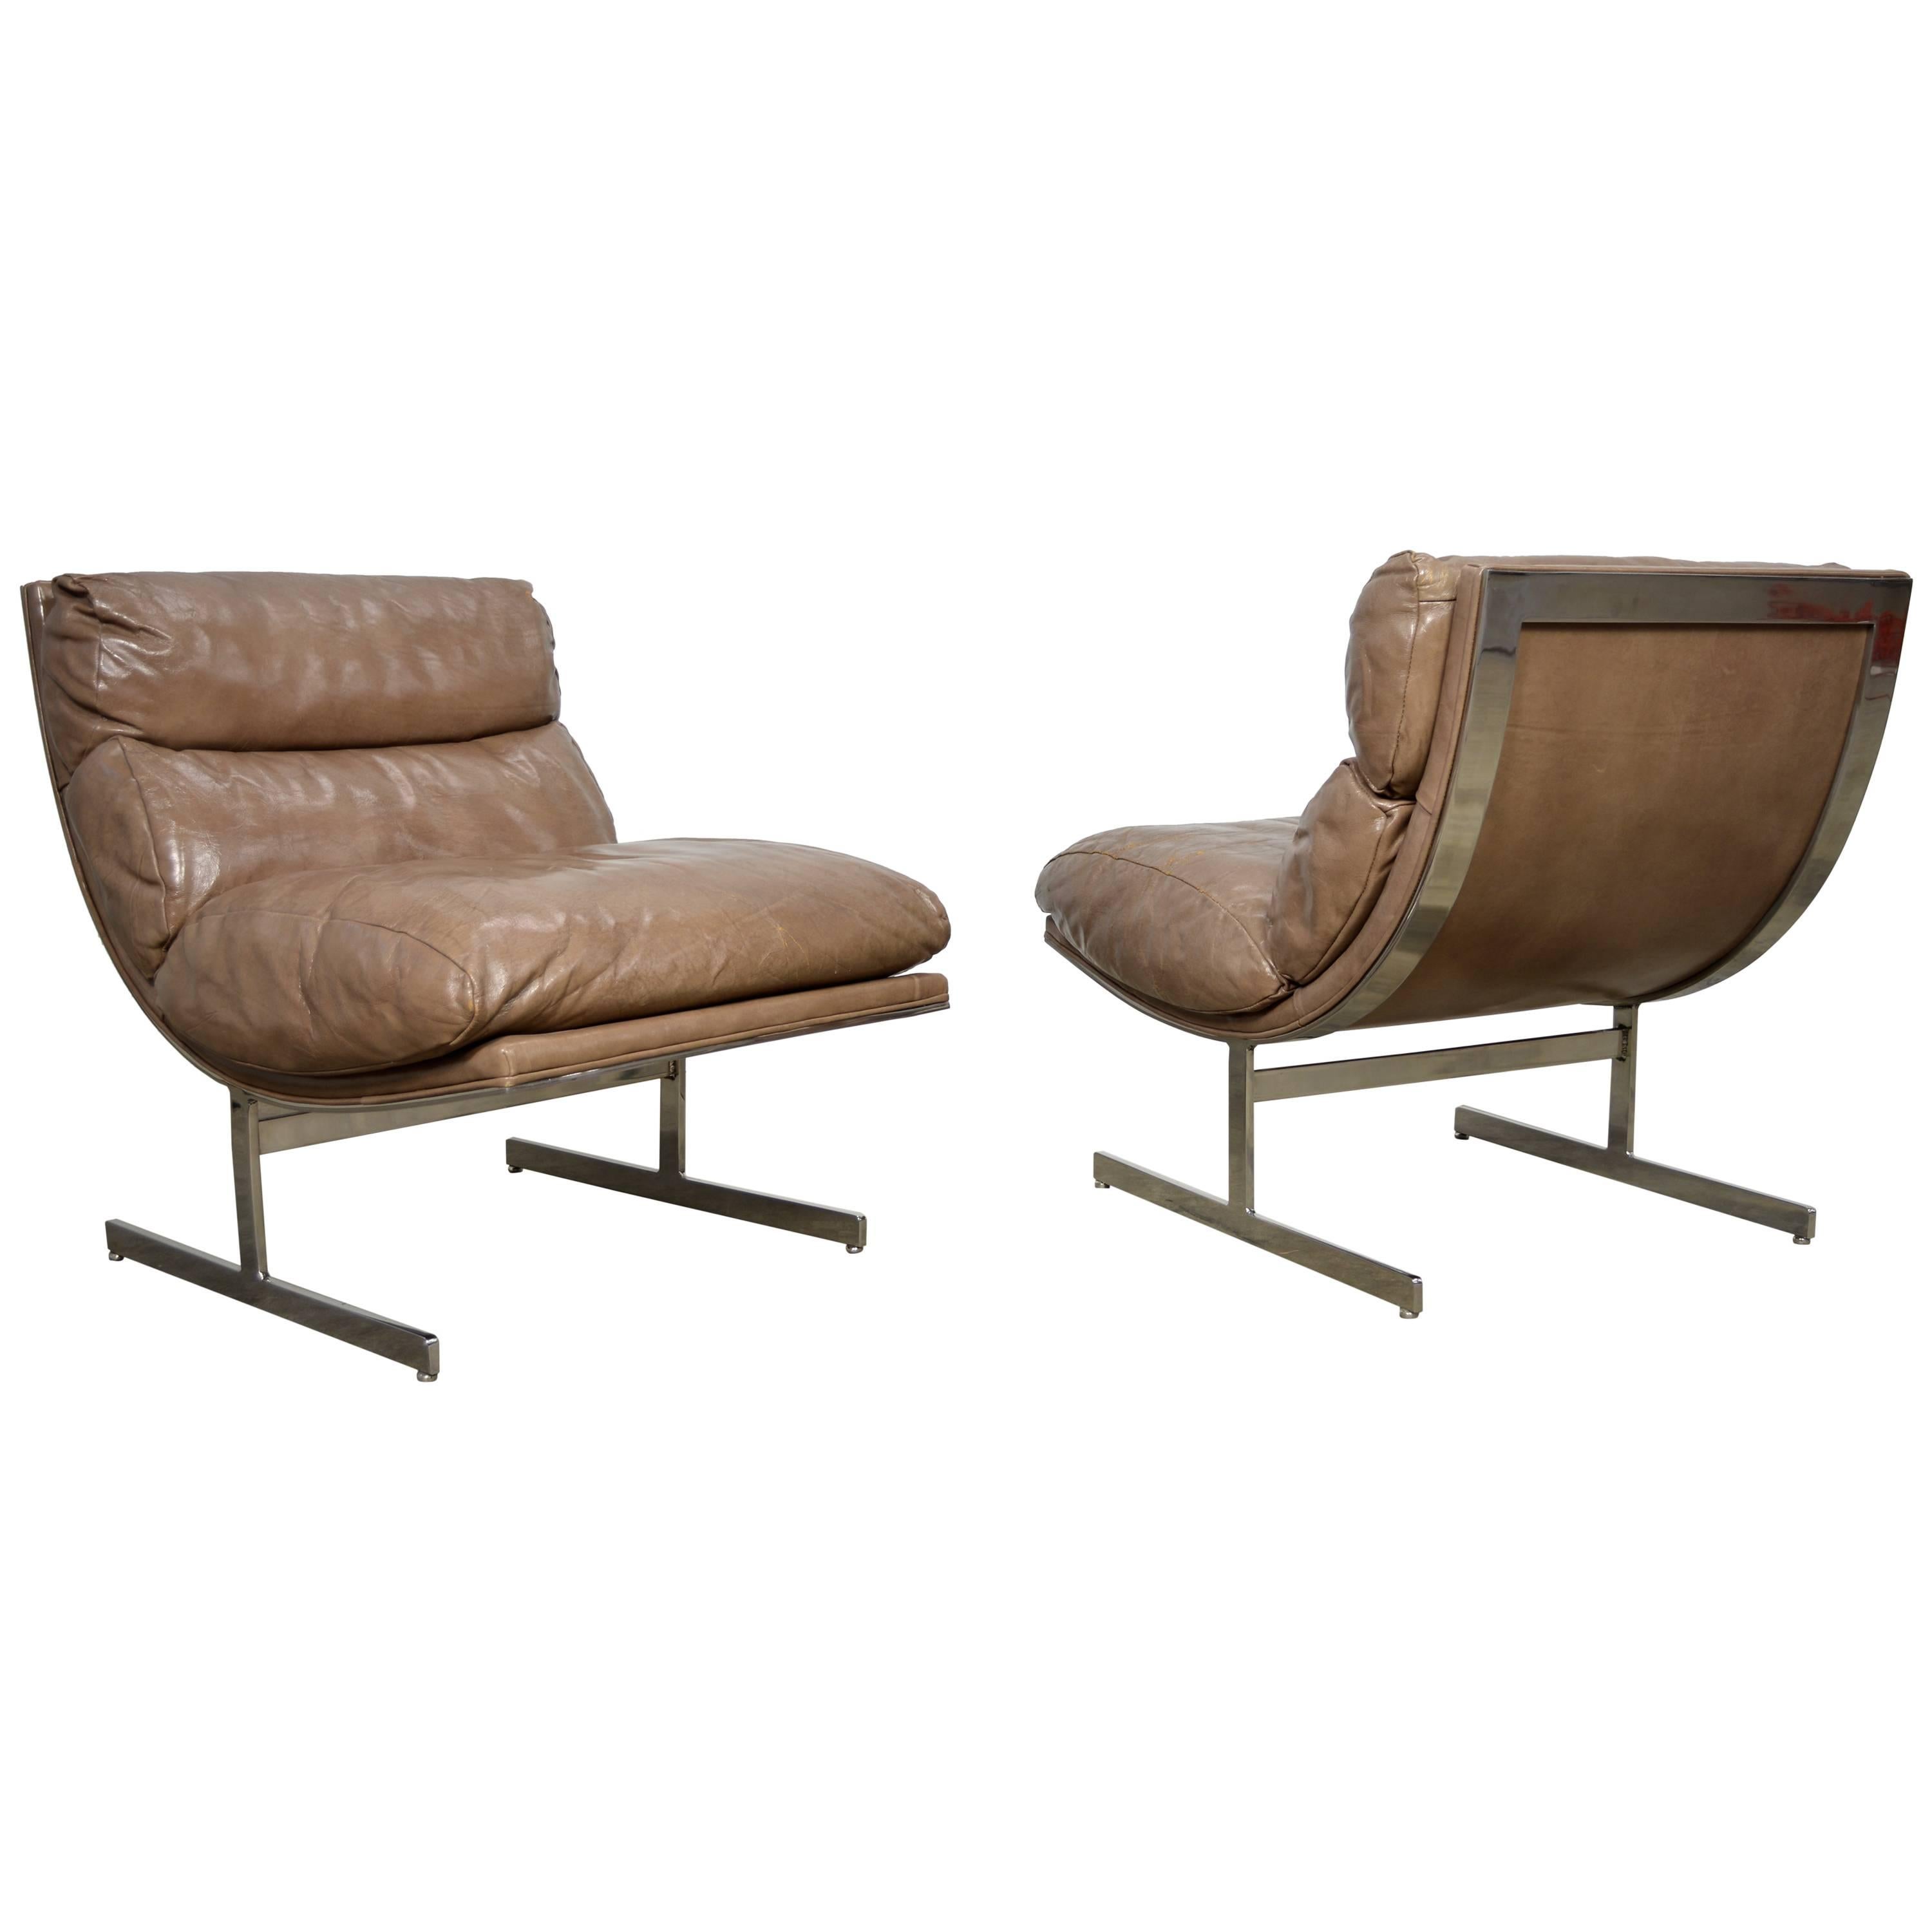 Kipp Stewart Pair of Leather "Arc" Chairs for Directional